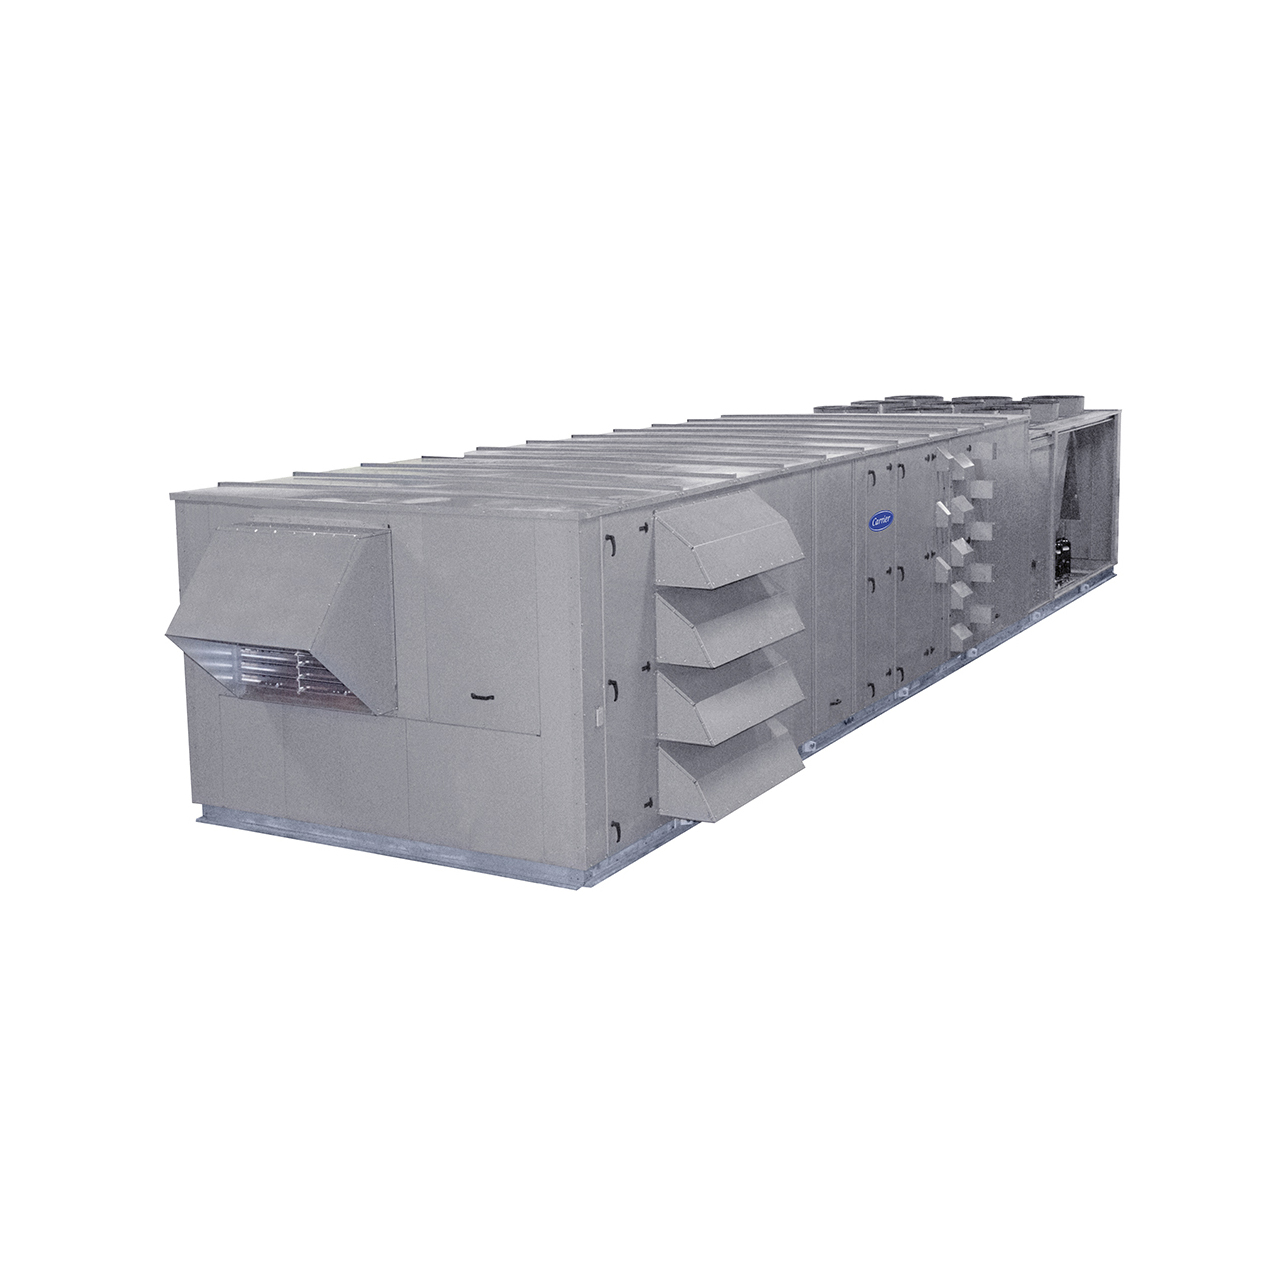 Carrier N Series rooftop units are pre-wired and factory-tested in both cooling and heating modes. All 50N models feature a double wall foam panel cabinet design with hinged man-sized access panels. 